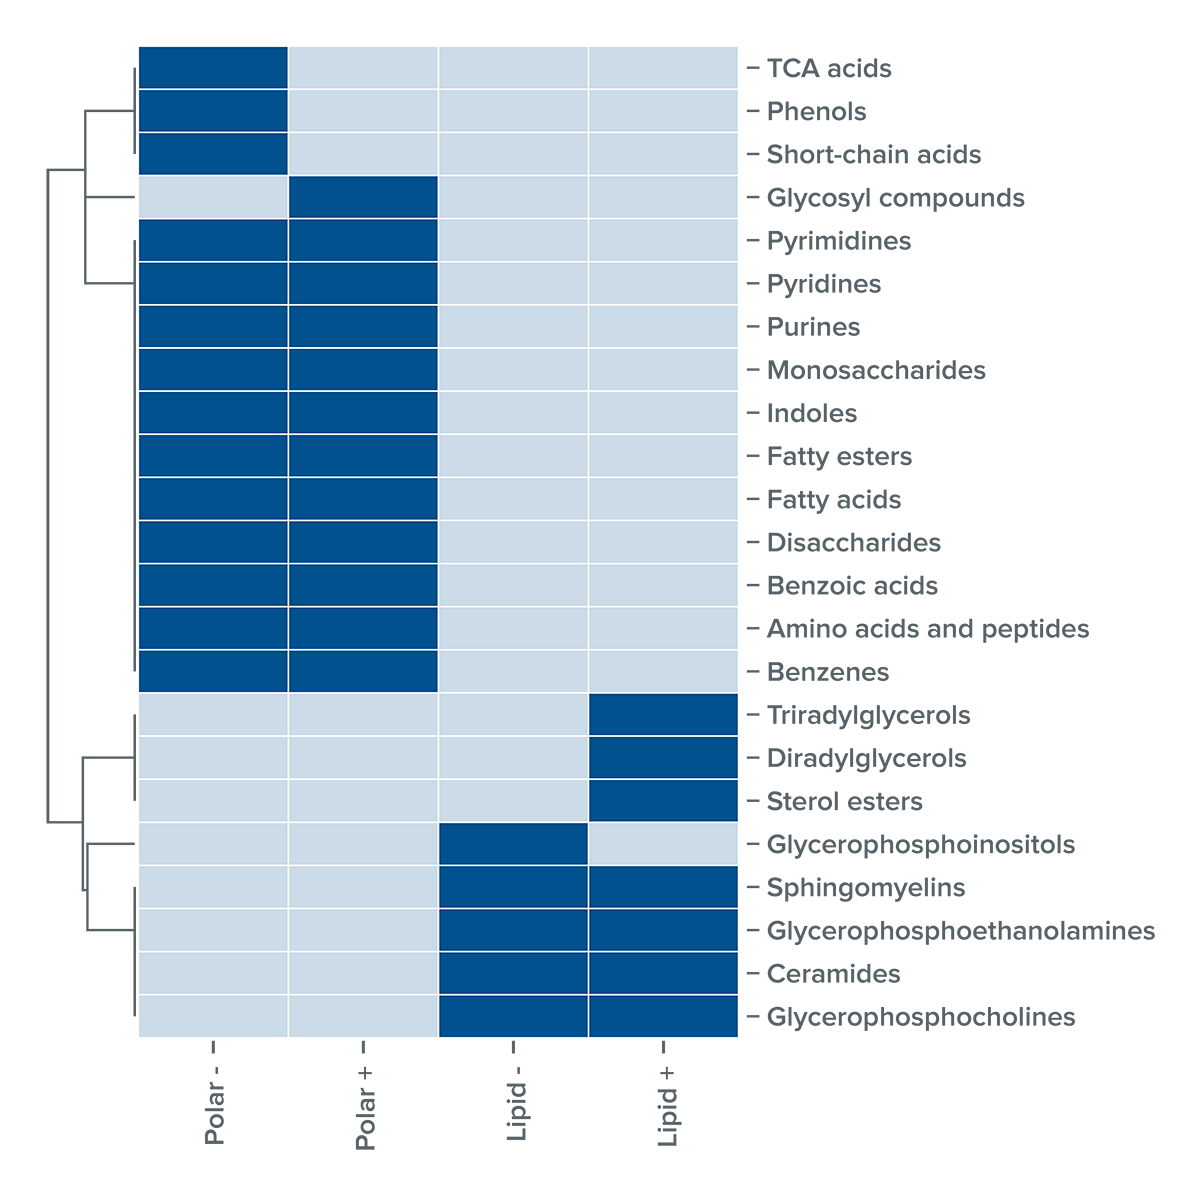 An example chart of major chemical classes of metabolites and lipids identified in a Next-Generation Metabolomics analysis.